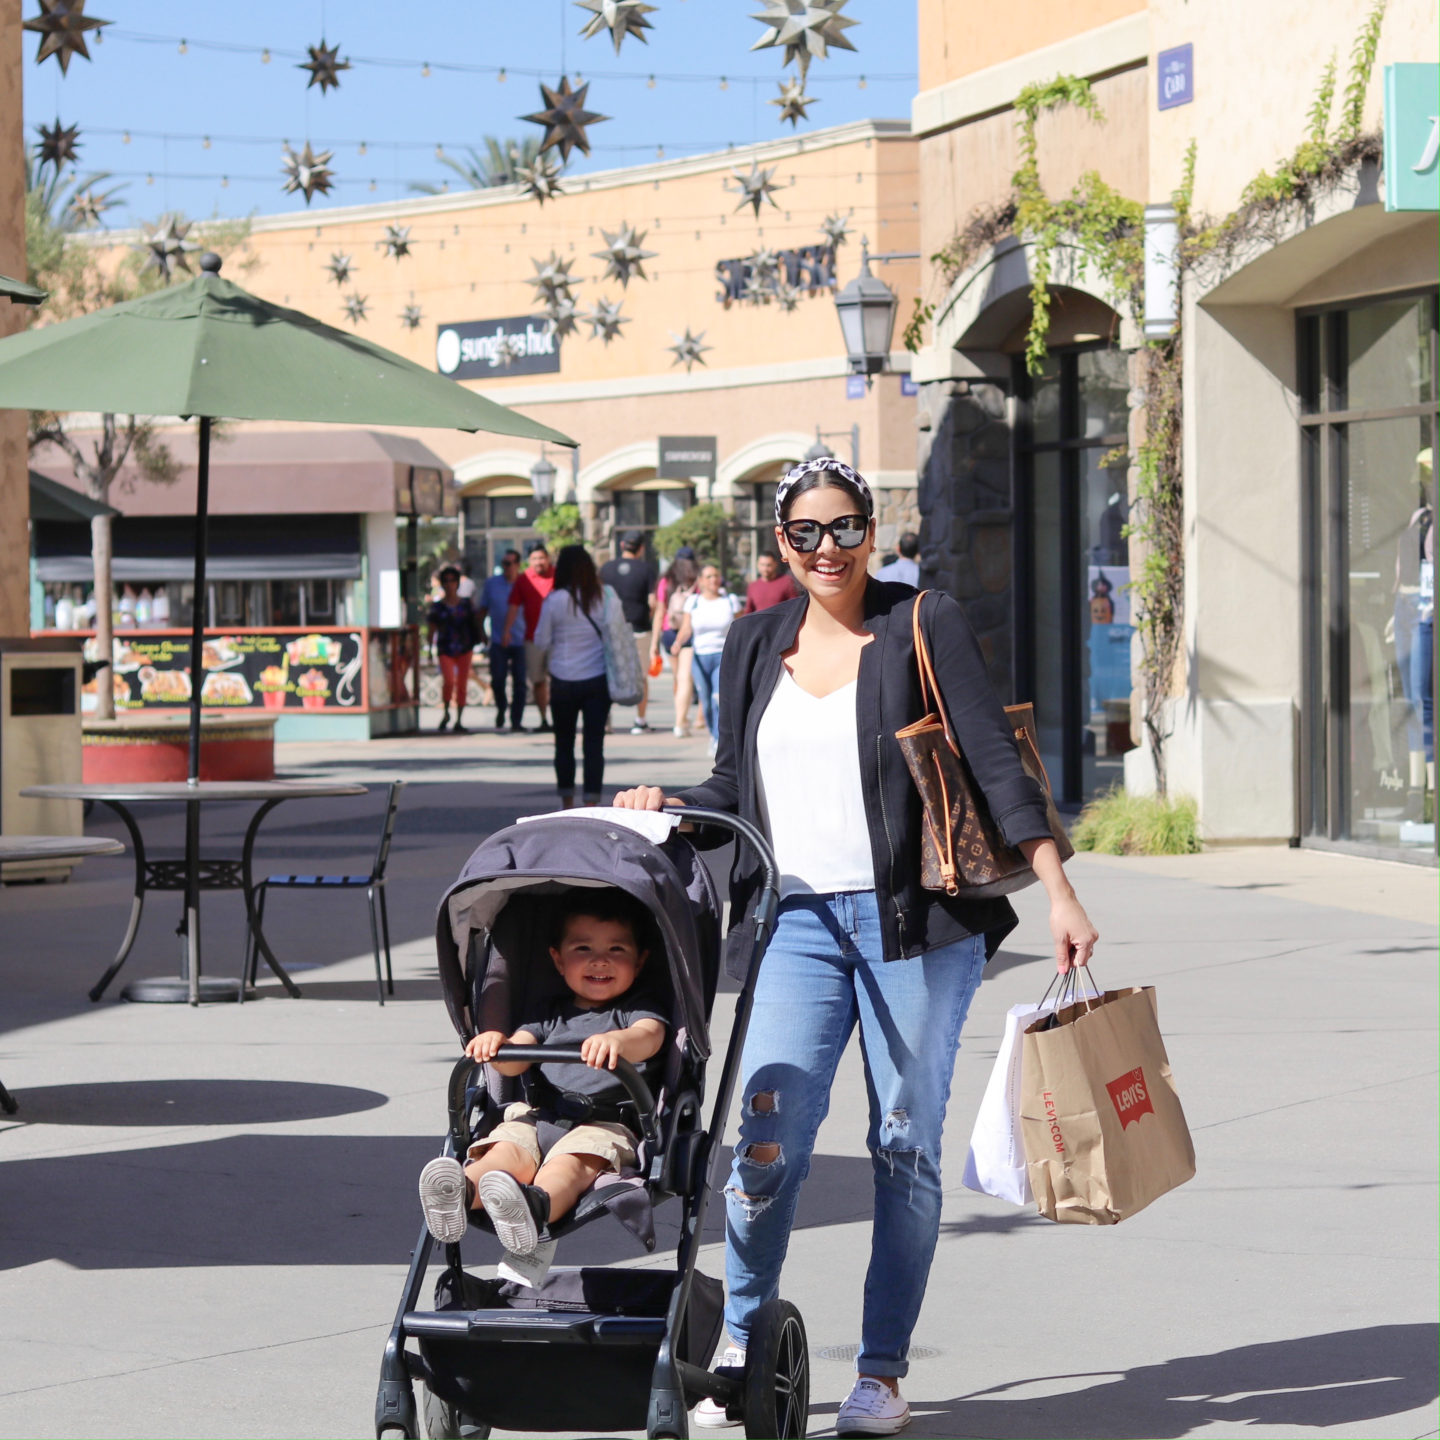 Getting Holiday Ready with Las Americas Premium Outlets - Lil bits of Chic